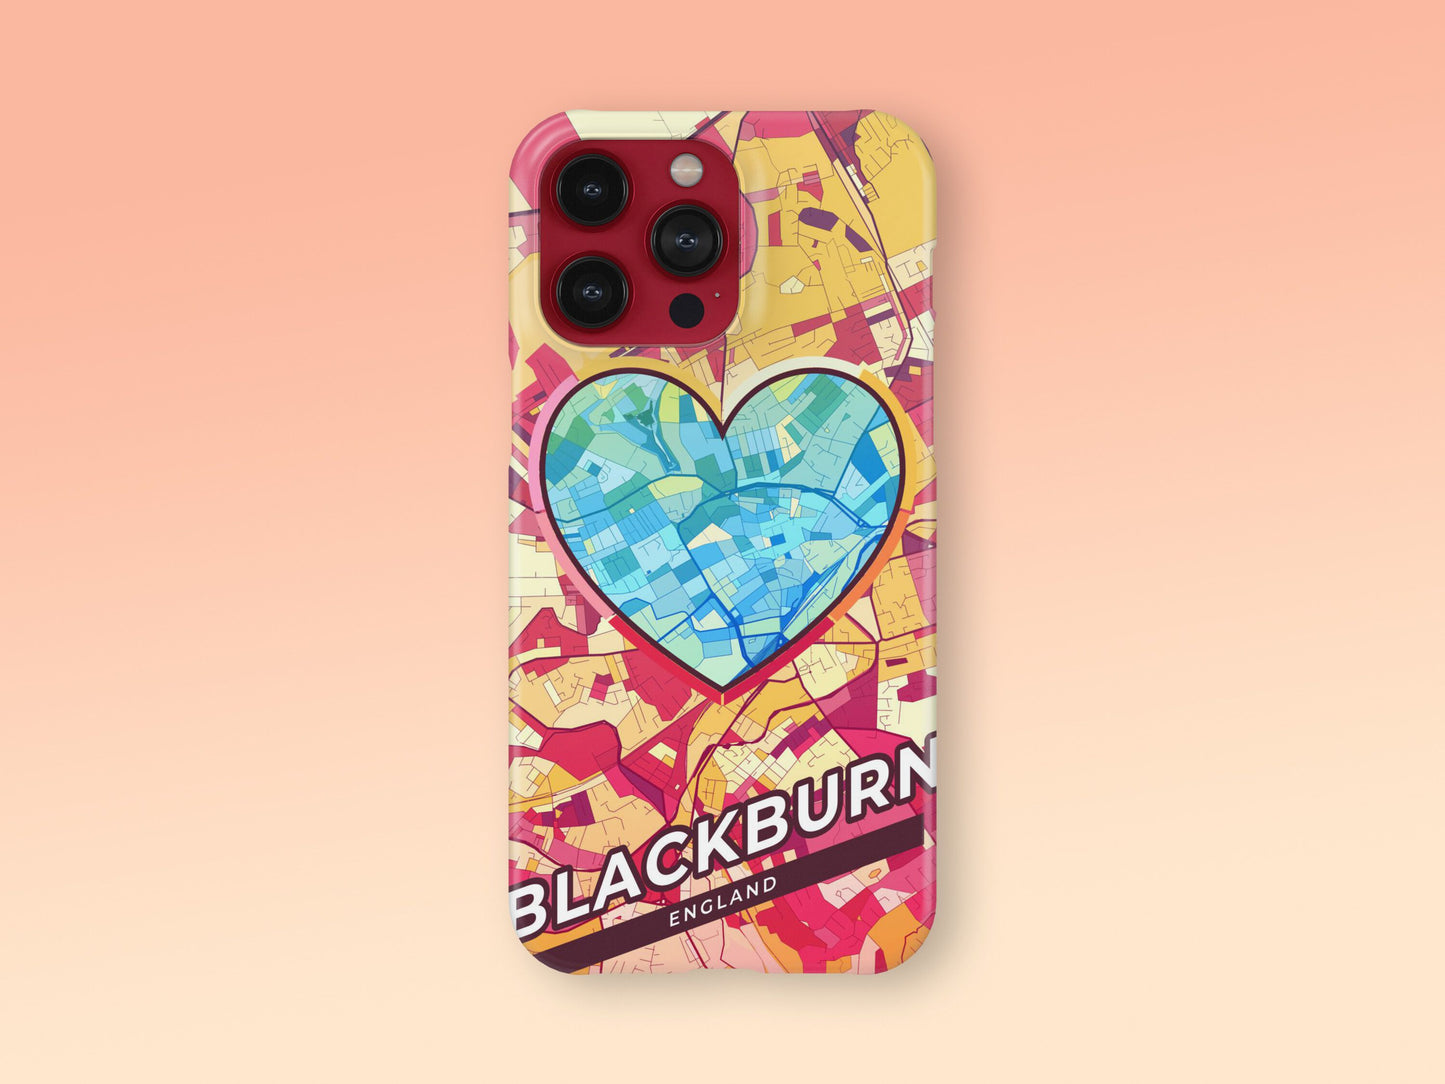 Blackburn England slim phone case with colorful icon. Birthday, wedding or housewarming gift. Couple match cases. 2